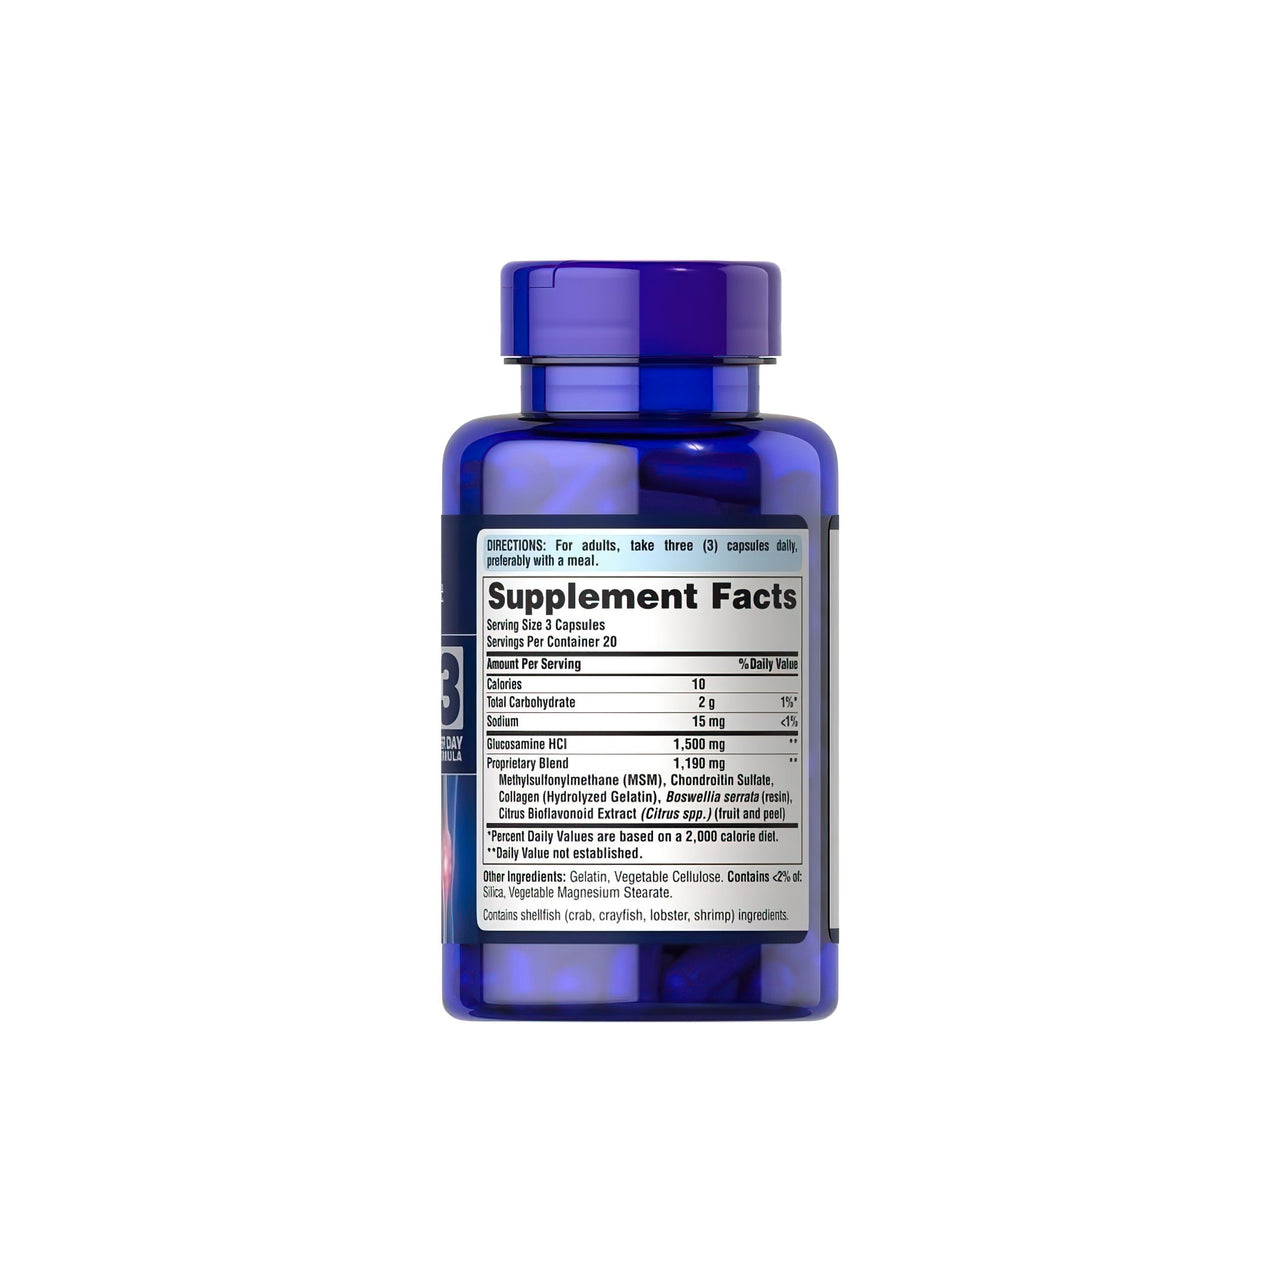 A bottle of Glucosamine Chondroitin MSM 60 capsules supplement by Puritan's Pride on a white background.